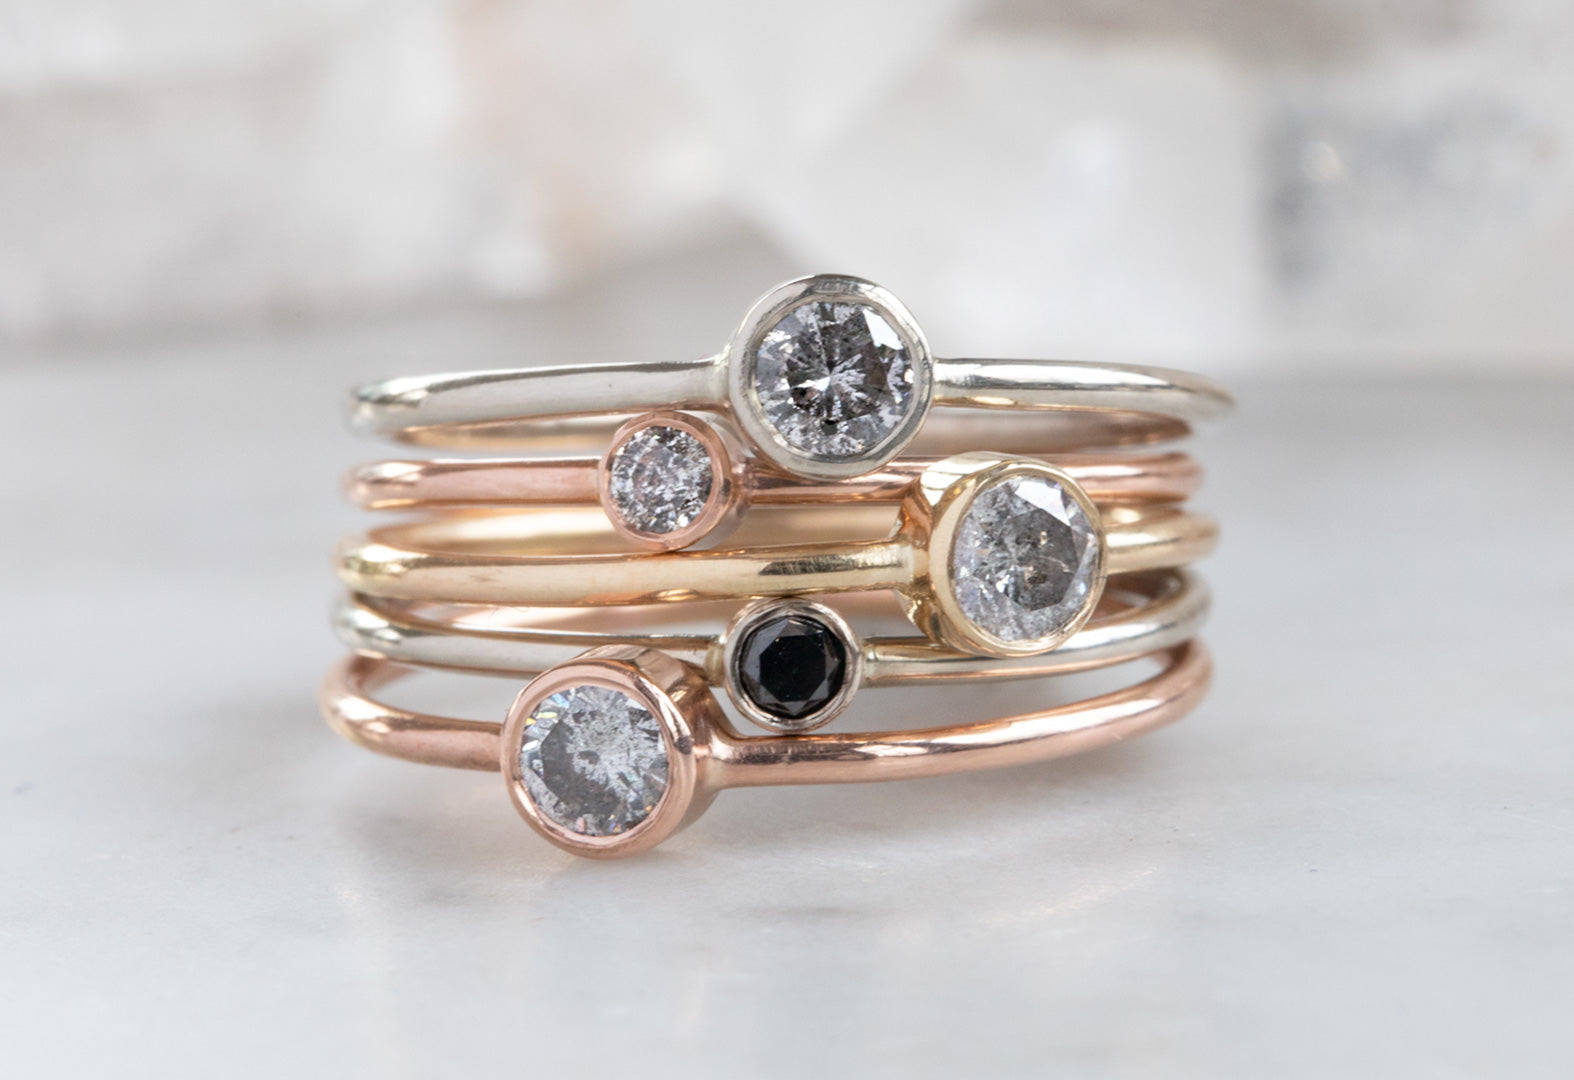 Check out this season's latest stackable rings from luxury jewellers